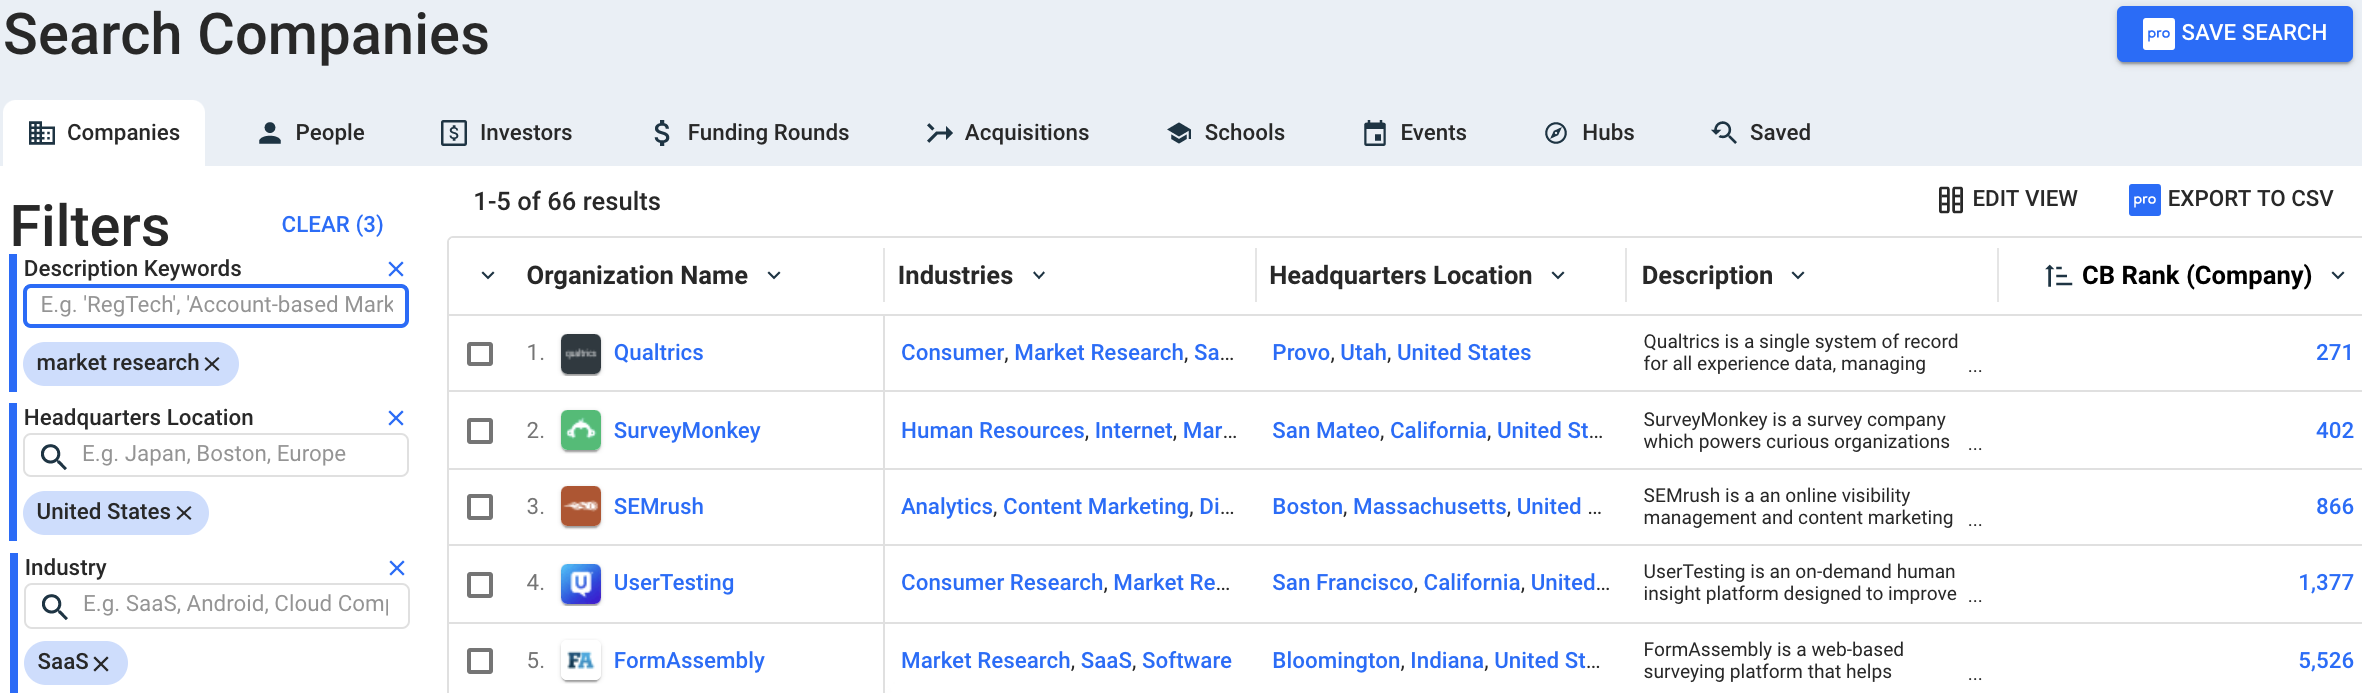 Crunchbase Companies Search Top Tool for Market Research